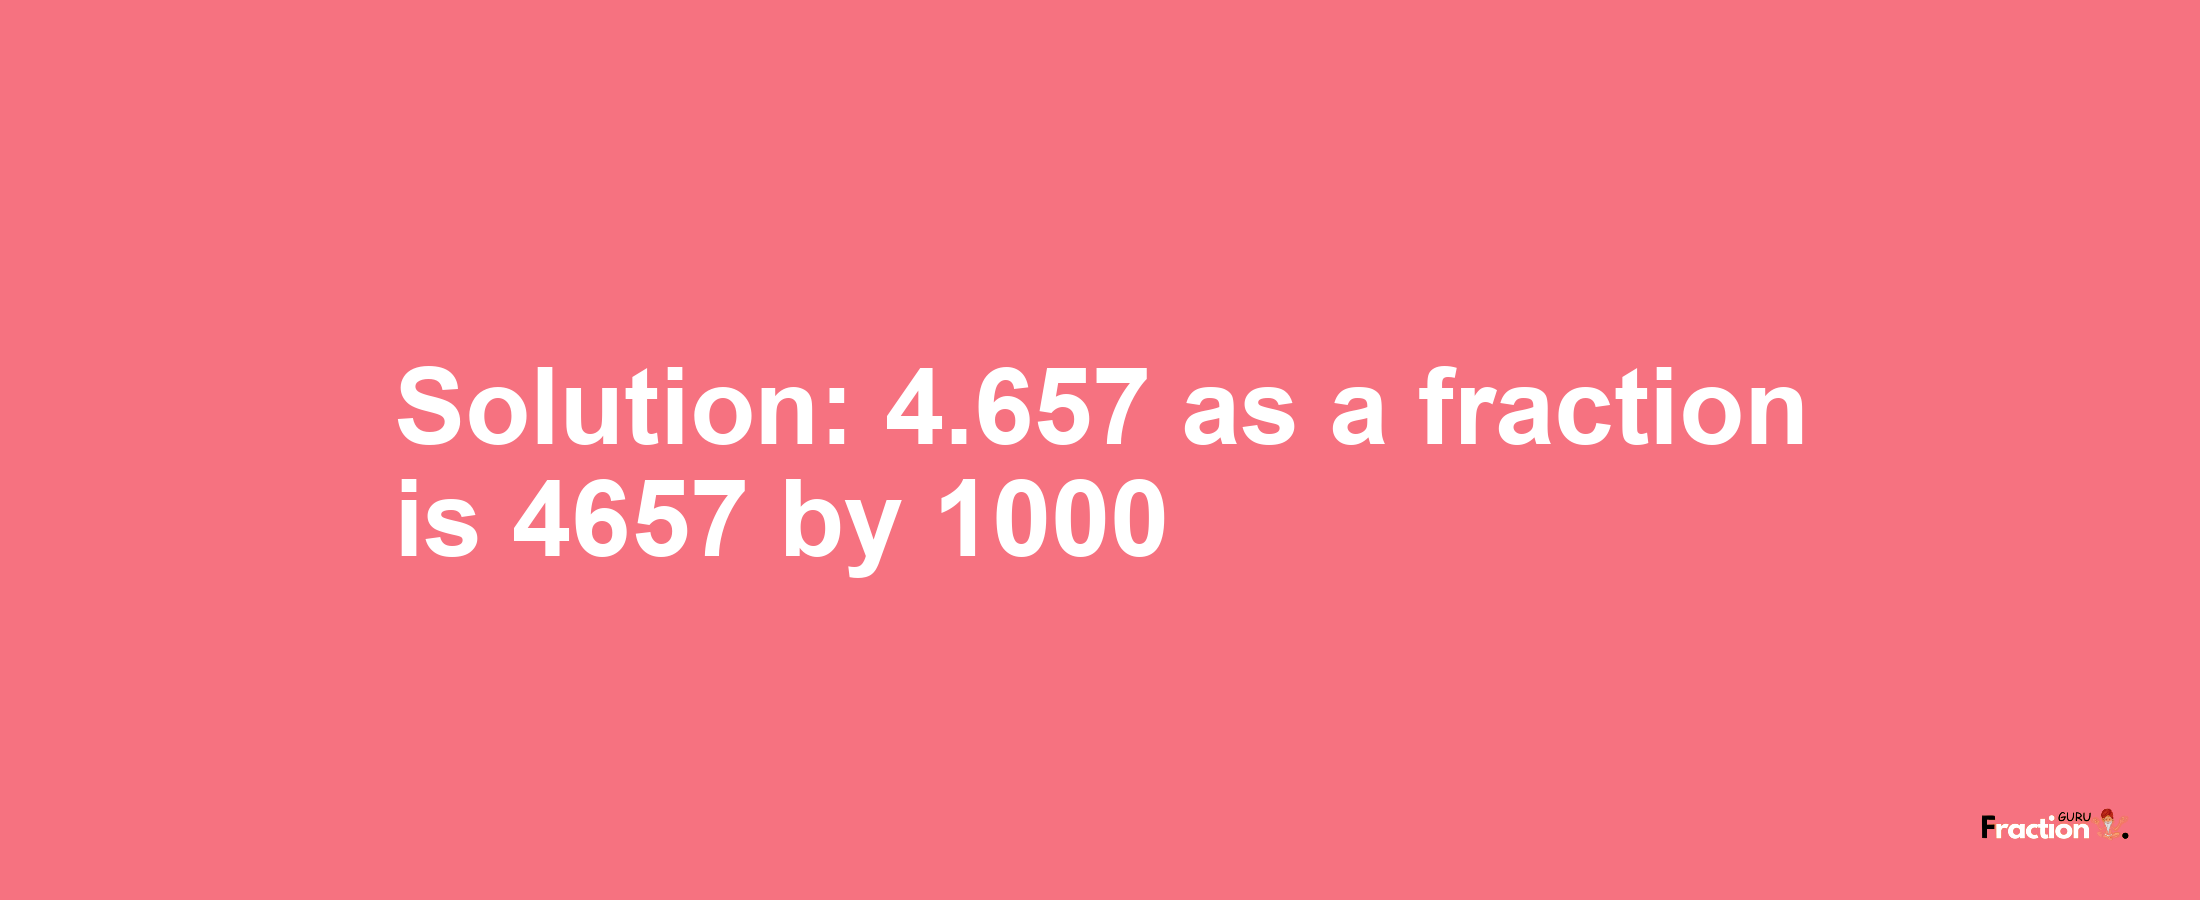 Solution:4.657 as a fraction is 4657/1000